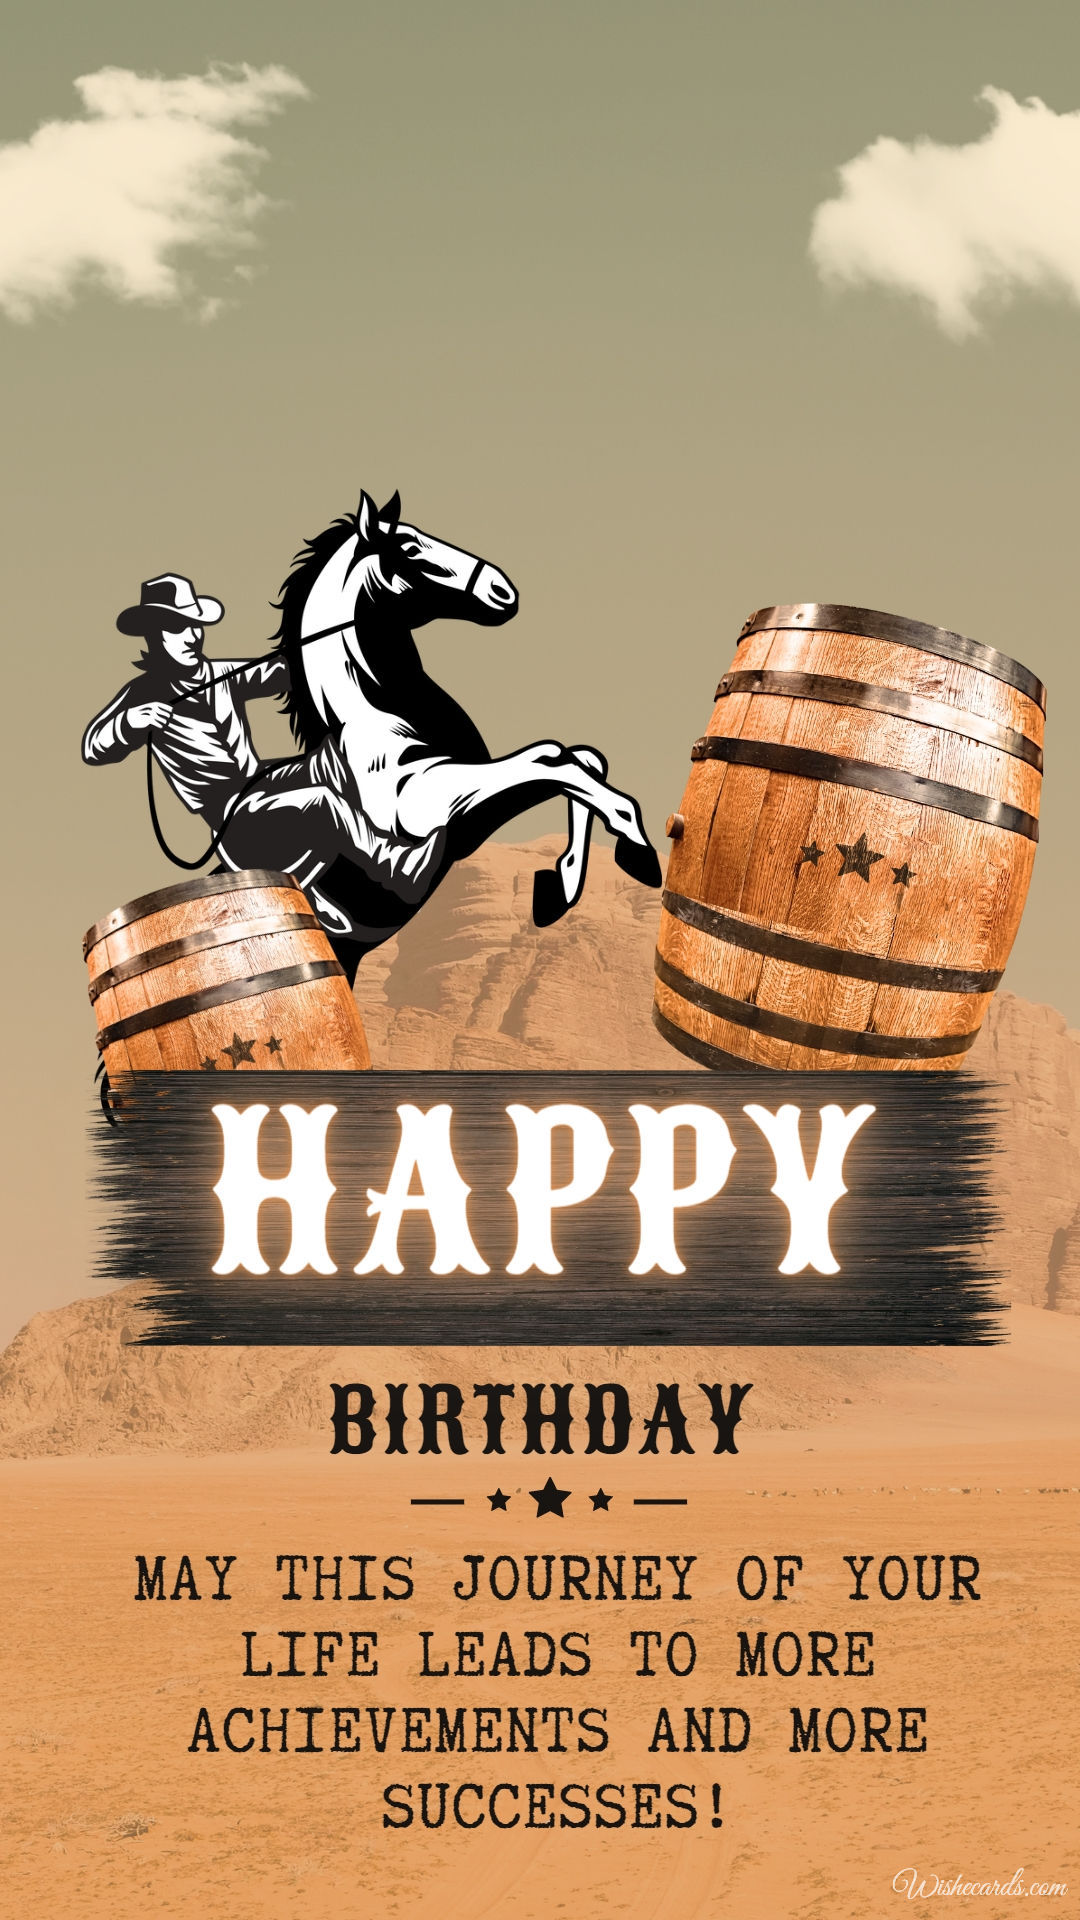 Happy Birthday Cowboy Images and Cards